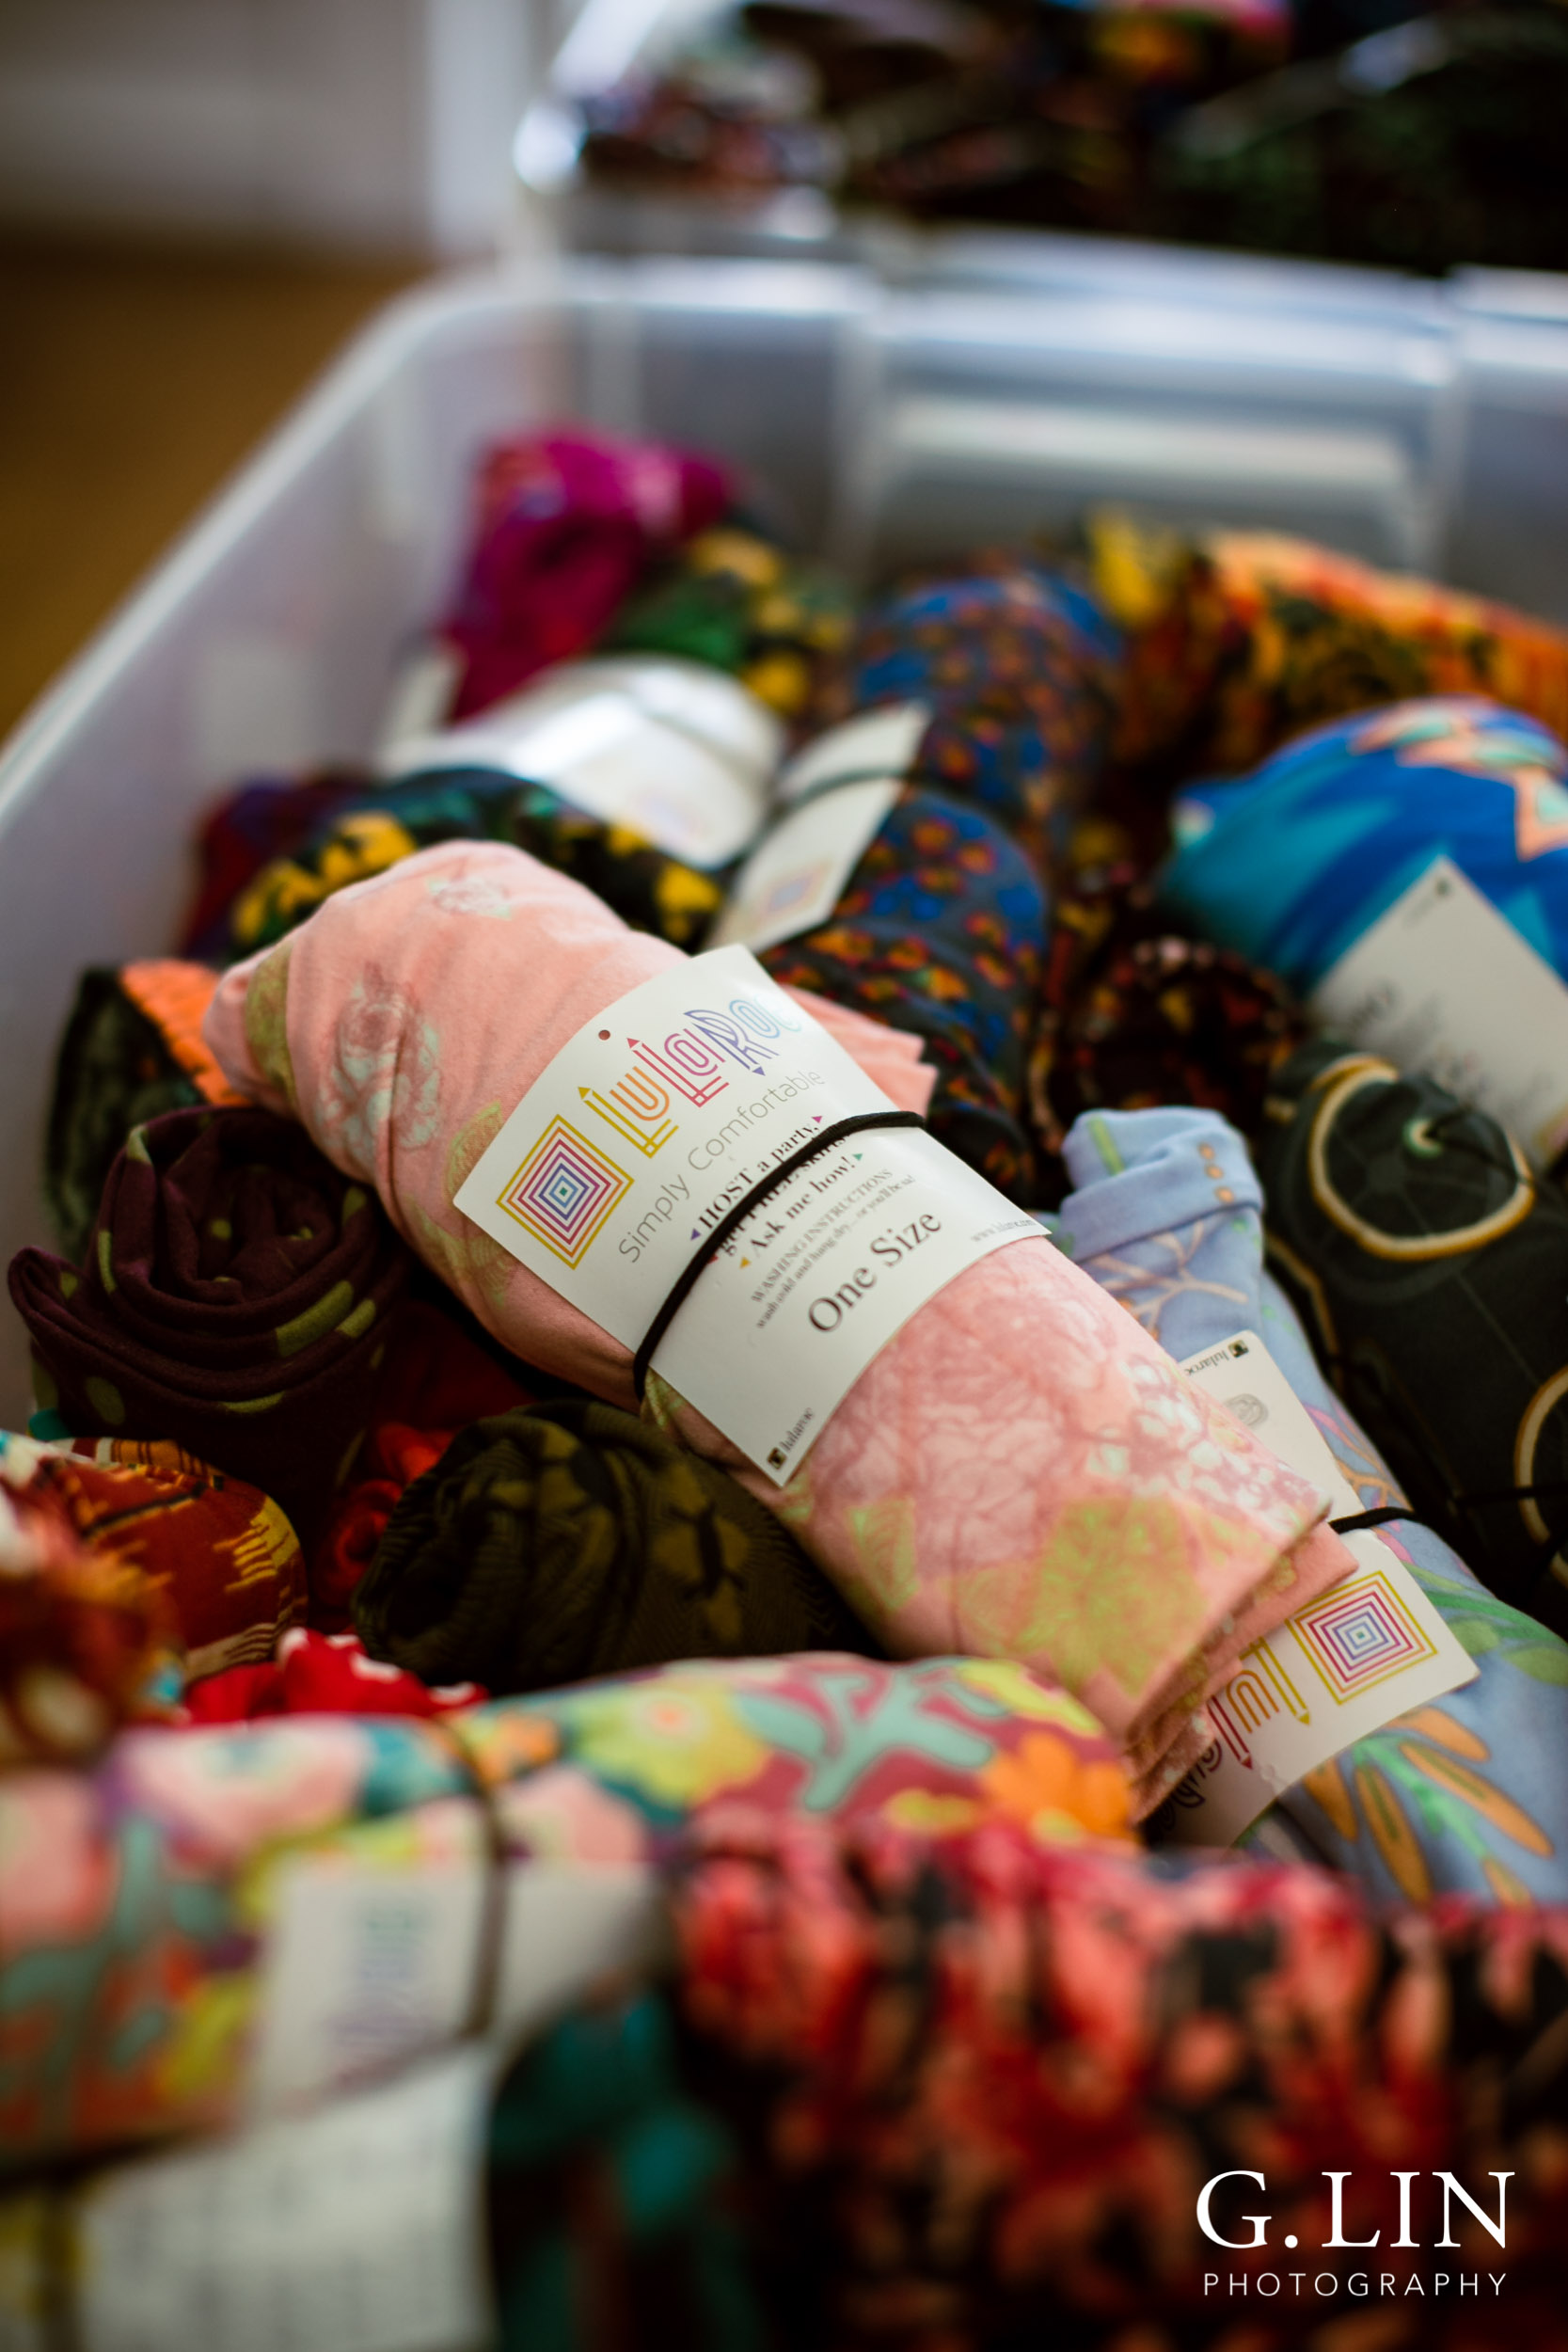 Raleigh Event Photographer | G. Lin Photography | Close up of leggings inside bin